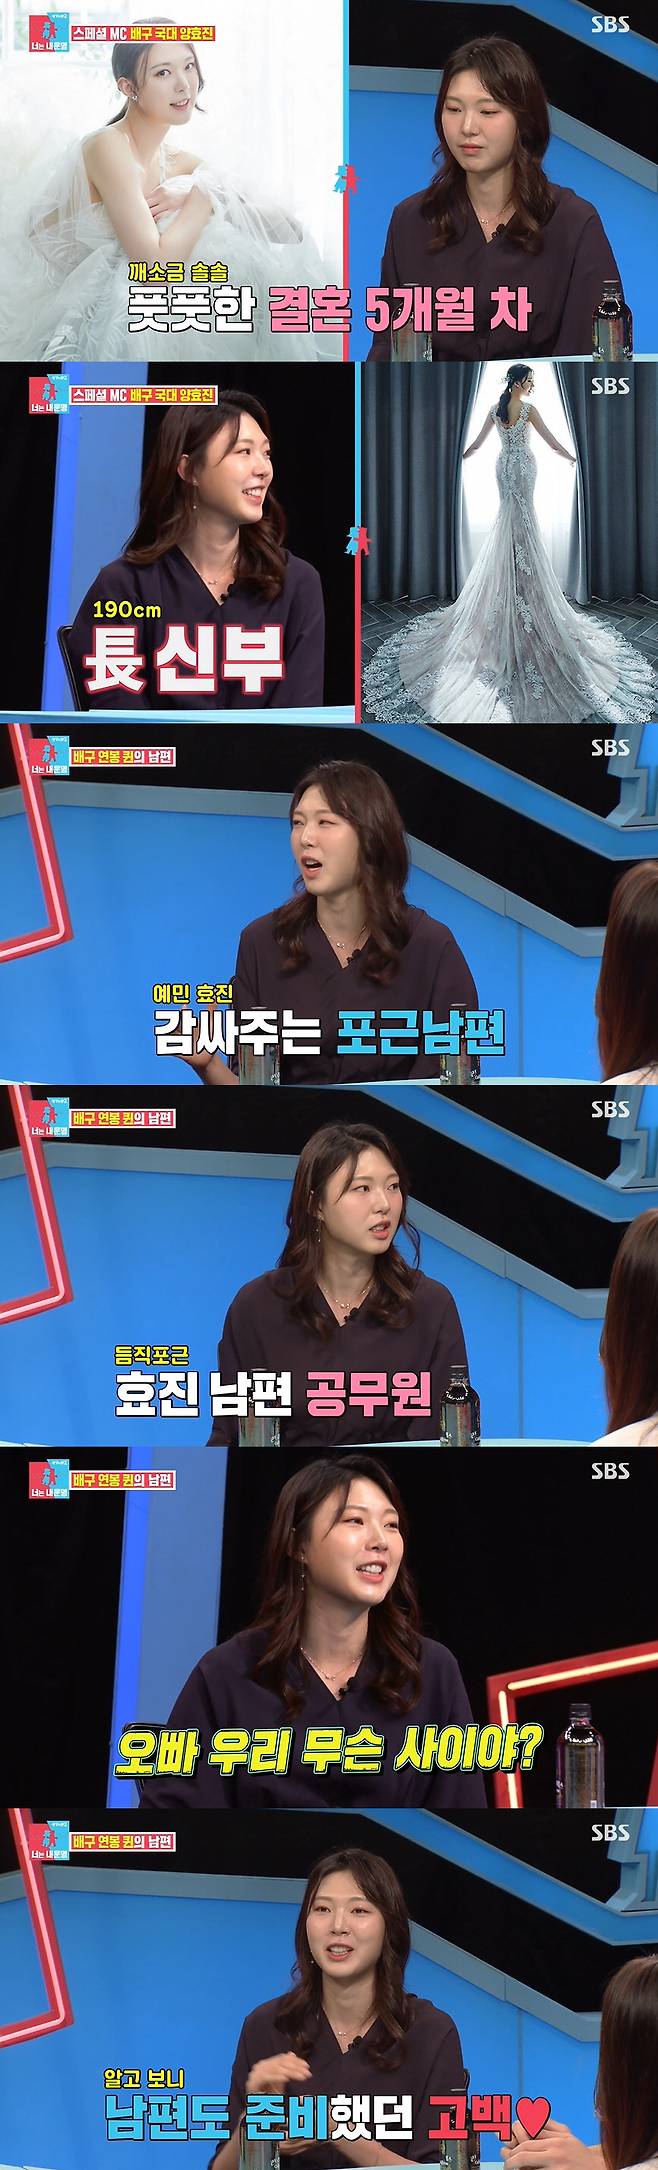 Volleyball player Yang Hyo-jin reveals his love story with Husband and reveals his affection for his senior Kim Yeon-koung.Yang Hyo-jin appeared as a special MC on SBS Sangsangmong Season 2 - You Are My Destiny broadcast on the 20th.Yang Hyo-jin, who marriages in April, asked about his honeymoon life, saying, I did not see Husband at all because of marriage and Tokyo Olympics.Then, a wedding picture of Yang Hyo-jin, which became a hot topic, was released. Yang Hyo-jin, a 190-cm tall man, admired the long dress as a goddess.When asked about Husbands height, Yang Hyo-jin replied, Its 182cm, honestly, its a big persons height, but its a little bit like it if youre next to me.As for Husbands personality, I am very sensitive to my personality. When I look at it, I look really sensitive.But Husband has a lot of personality, its like a bear, its a full-on style, he said.Yang Hyo-jin, who met Husband, a 4-year-old civil servant, on a blind date, said, I have a personality that is different from what I see.I have to do it quickly when I work, and Husband is a relaxed style. So I think I have to make a conclusion by taking a thumb for three to four months. He said, Husband takes me to the hostel by car, and I thought about this a hundred times.I feel good about each other, but I do not tell you clearly, so when I went to ask, What are we like, there was a static. I knew that I was going to be Confessions to me when I arrived, but I could not bear it and I was in a hurry. Meanwhile, Yang Hyo-jin said that the reason why he was able to keep the title of Salary Queen for domestic women volleyball for 9 years was thanks to his senior Kim Yeon-koung.Kim Sook said, Kim Yeon-koung said that he made Yang Hyo-jin into Salary Queen and said that he was self-promoting.Yang Hyo-jin said, Yes, when I go out, I start with my acquaintances and tell my foreign bishop that I made me Salary Queen.But frankly, I do not have a stake. I have learned a lot from the same room.I think there is 80% stake, he expressed his respect and affection for Kim Yeon-koung.